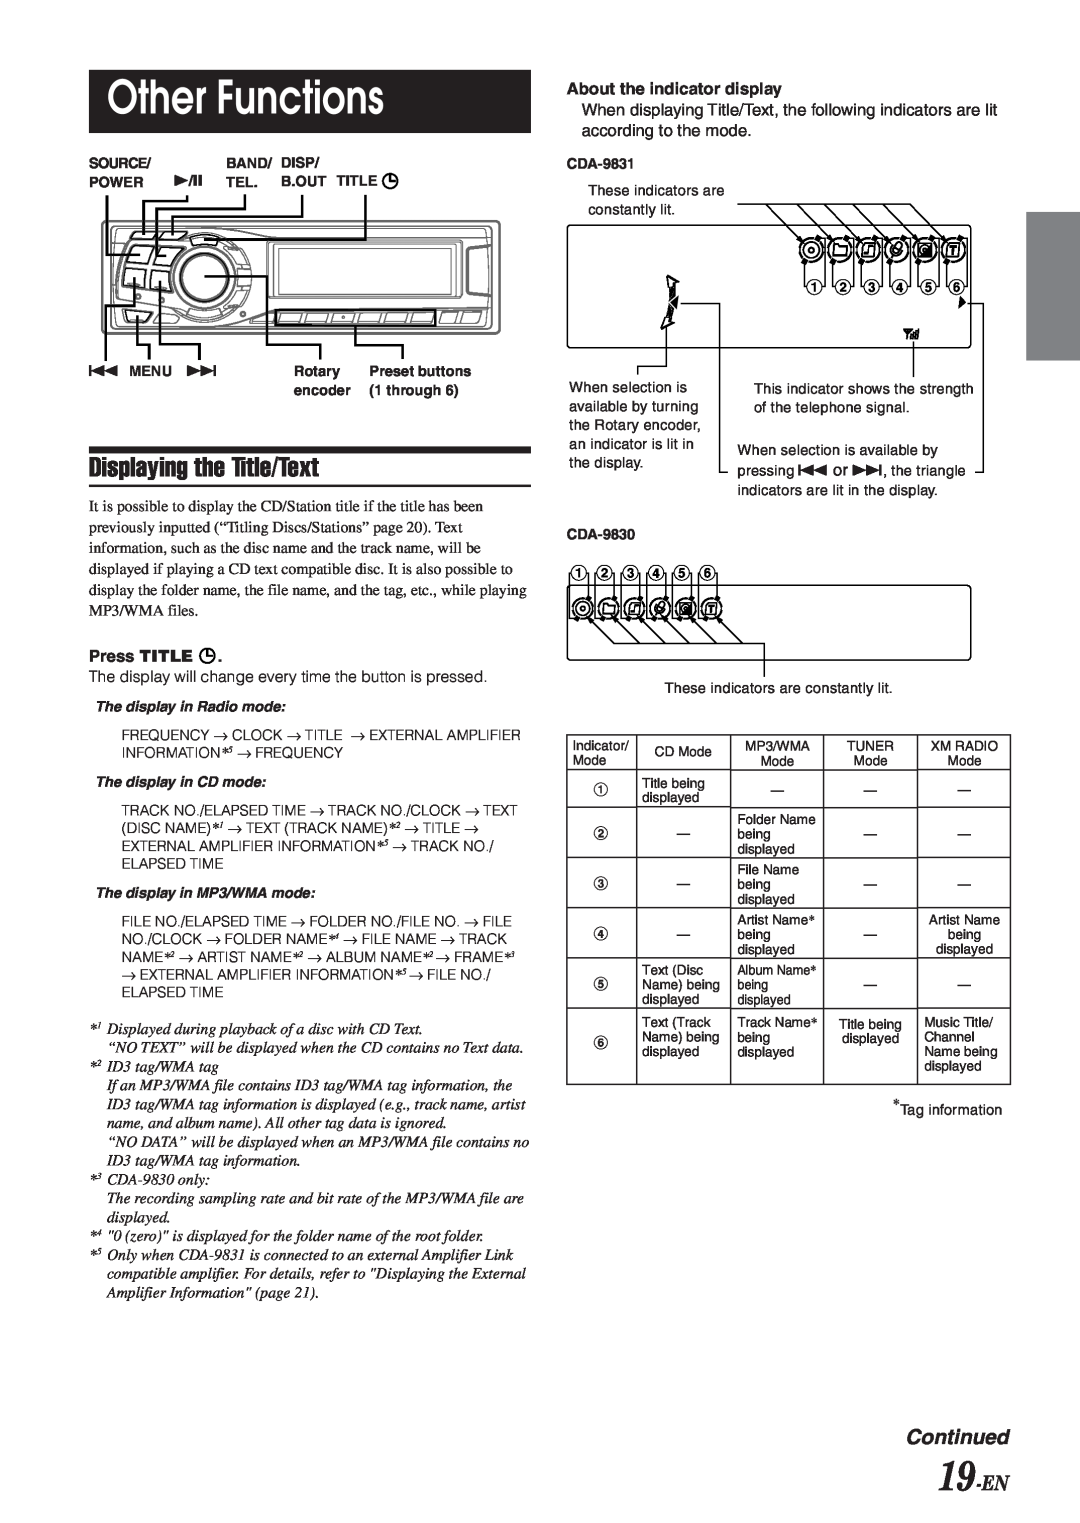 Alpine CDA-9831, CDA-9830 owner manual Other Functions, Displaying the Title/Text, 19-EN 